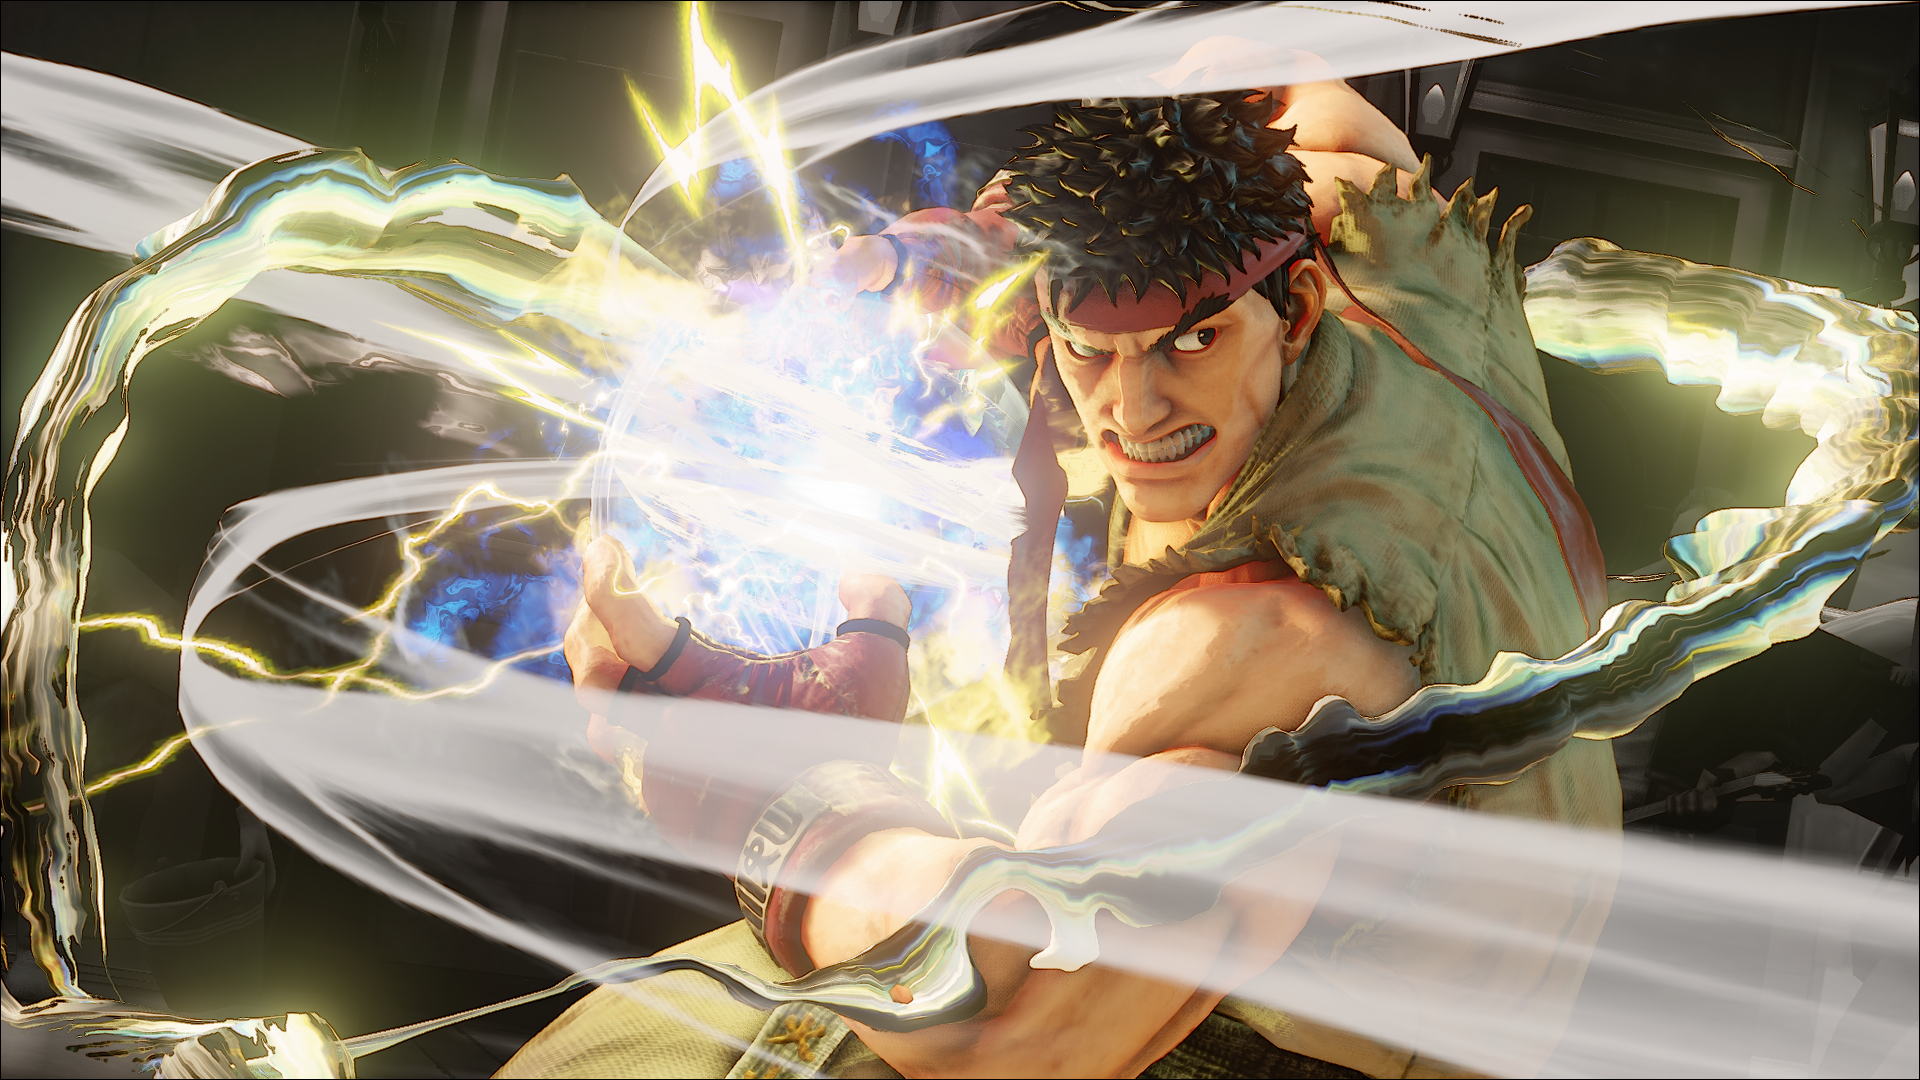 The 5 Best SFV Beginner Characters – Choose the perfect warrior